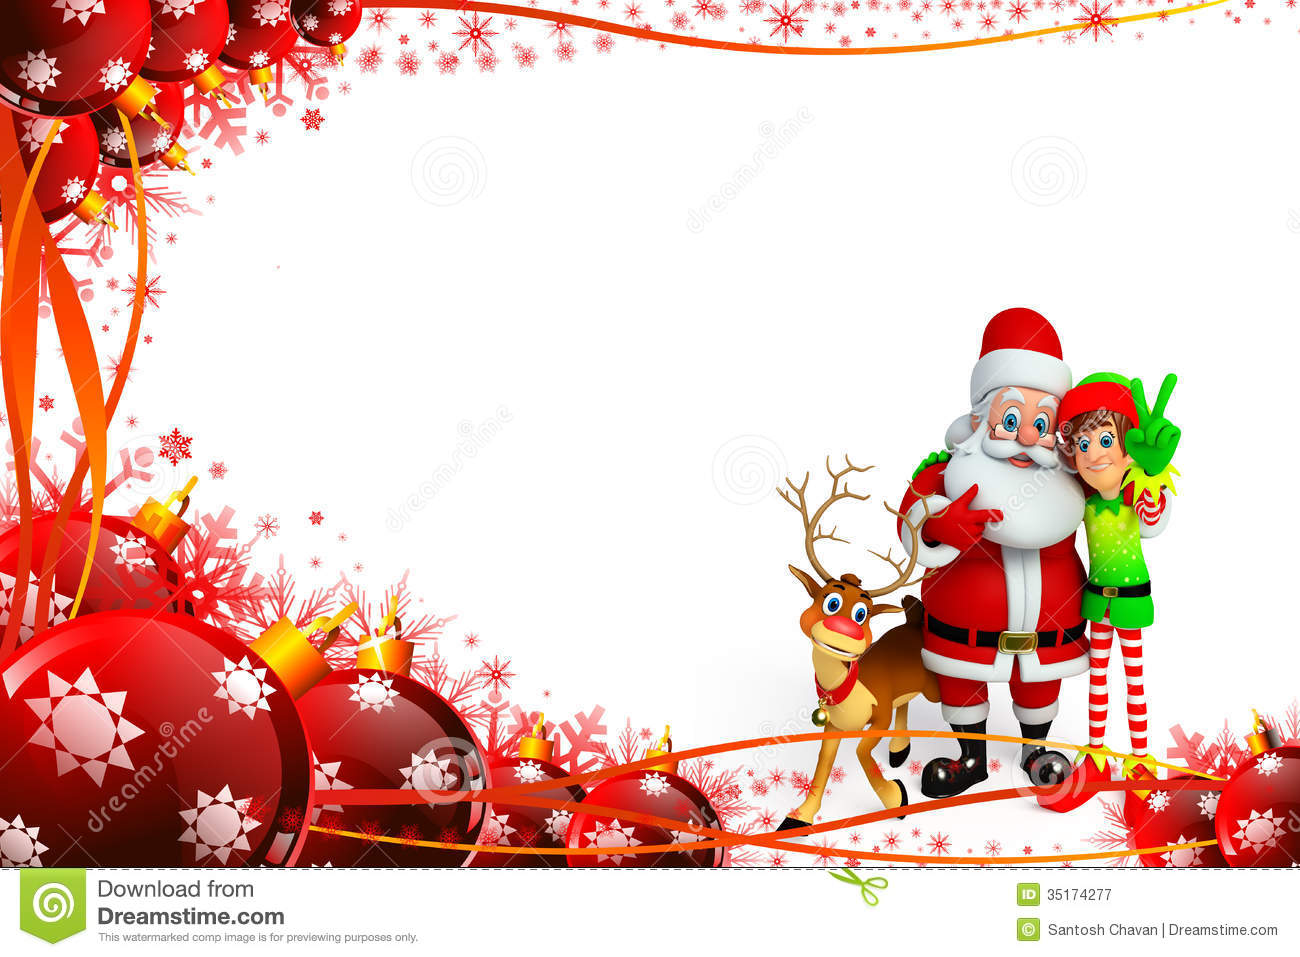     Photography  Santa Claus With Elves And Reindeer  Image  35174277